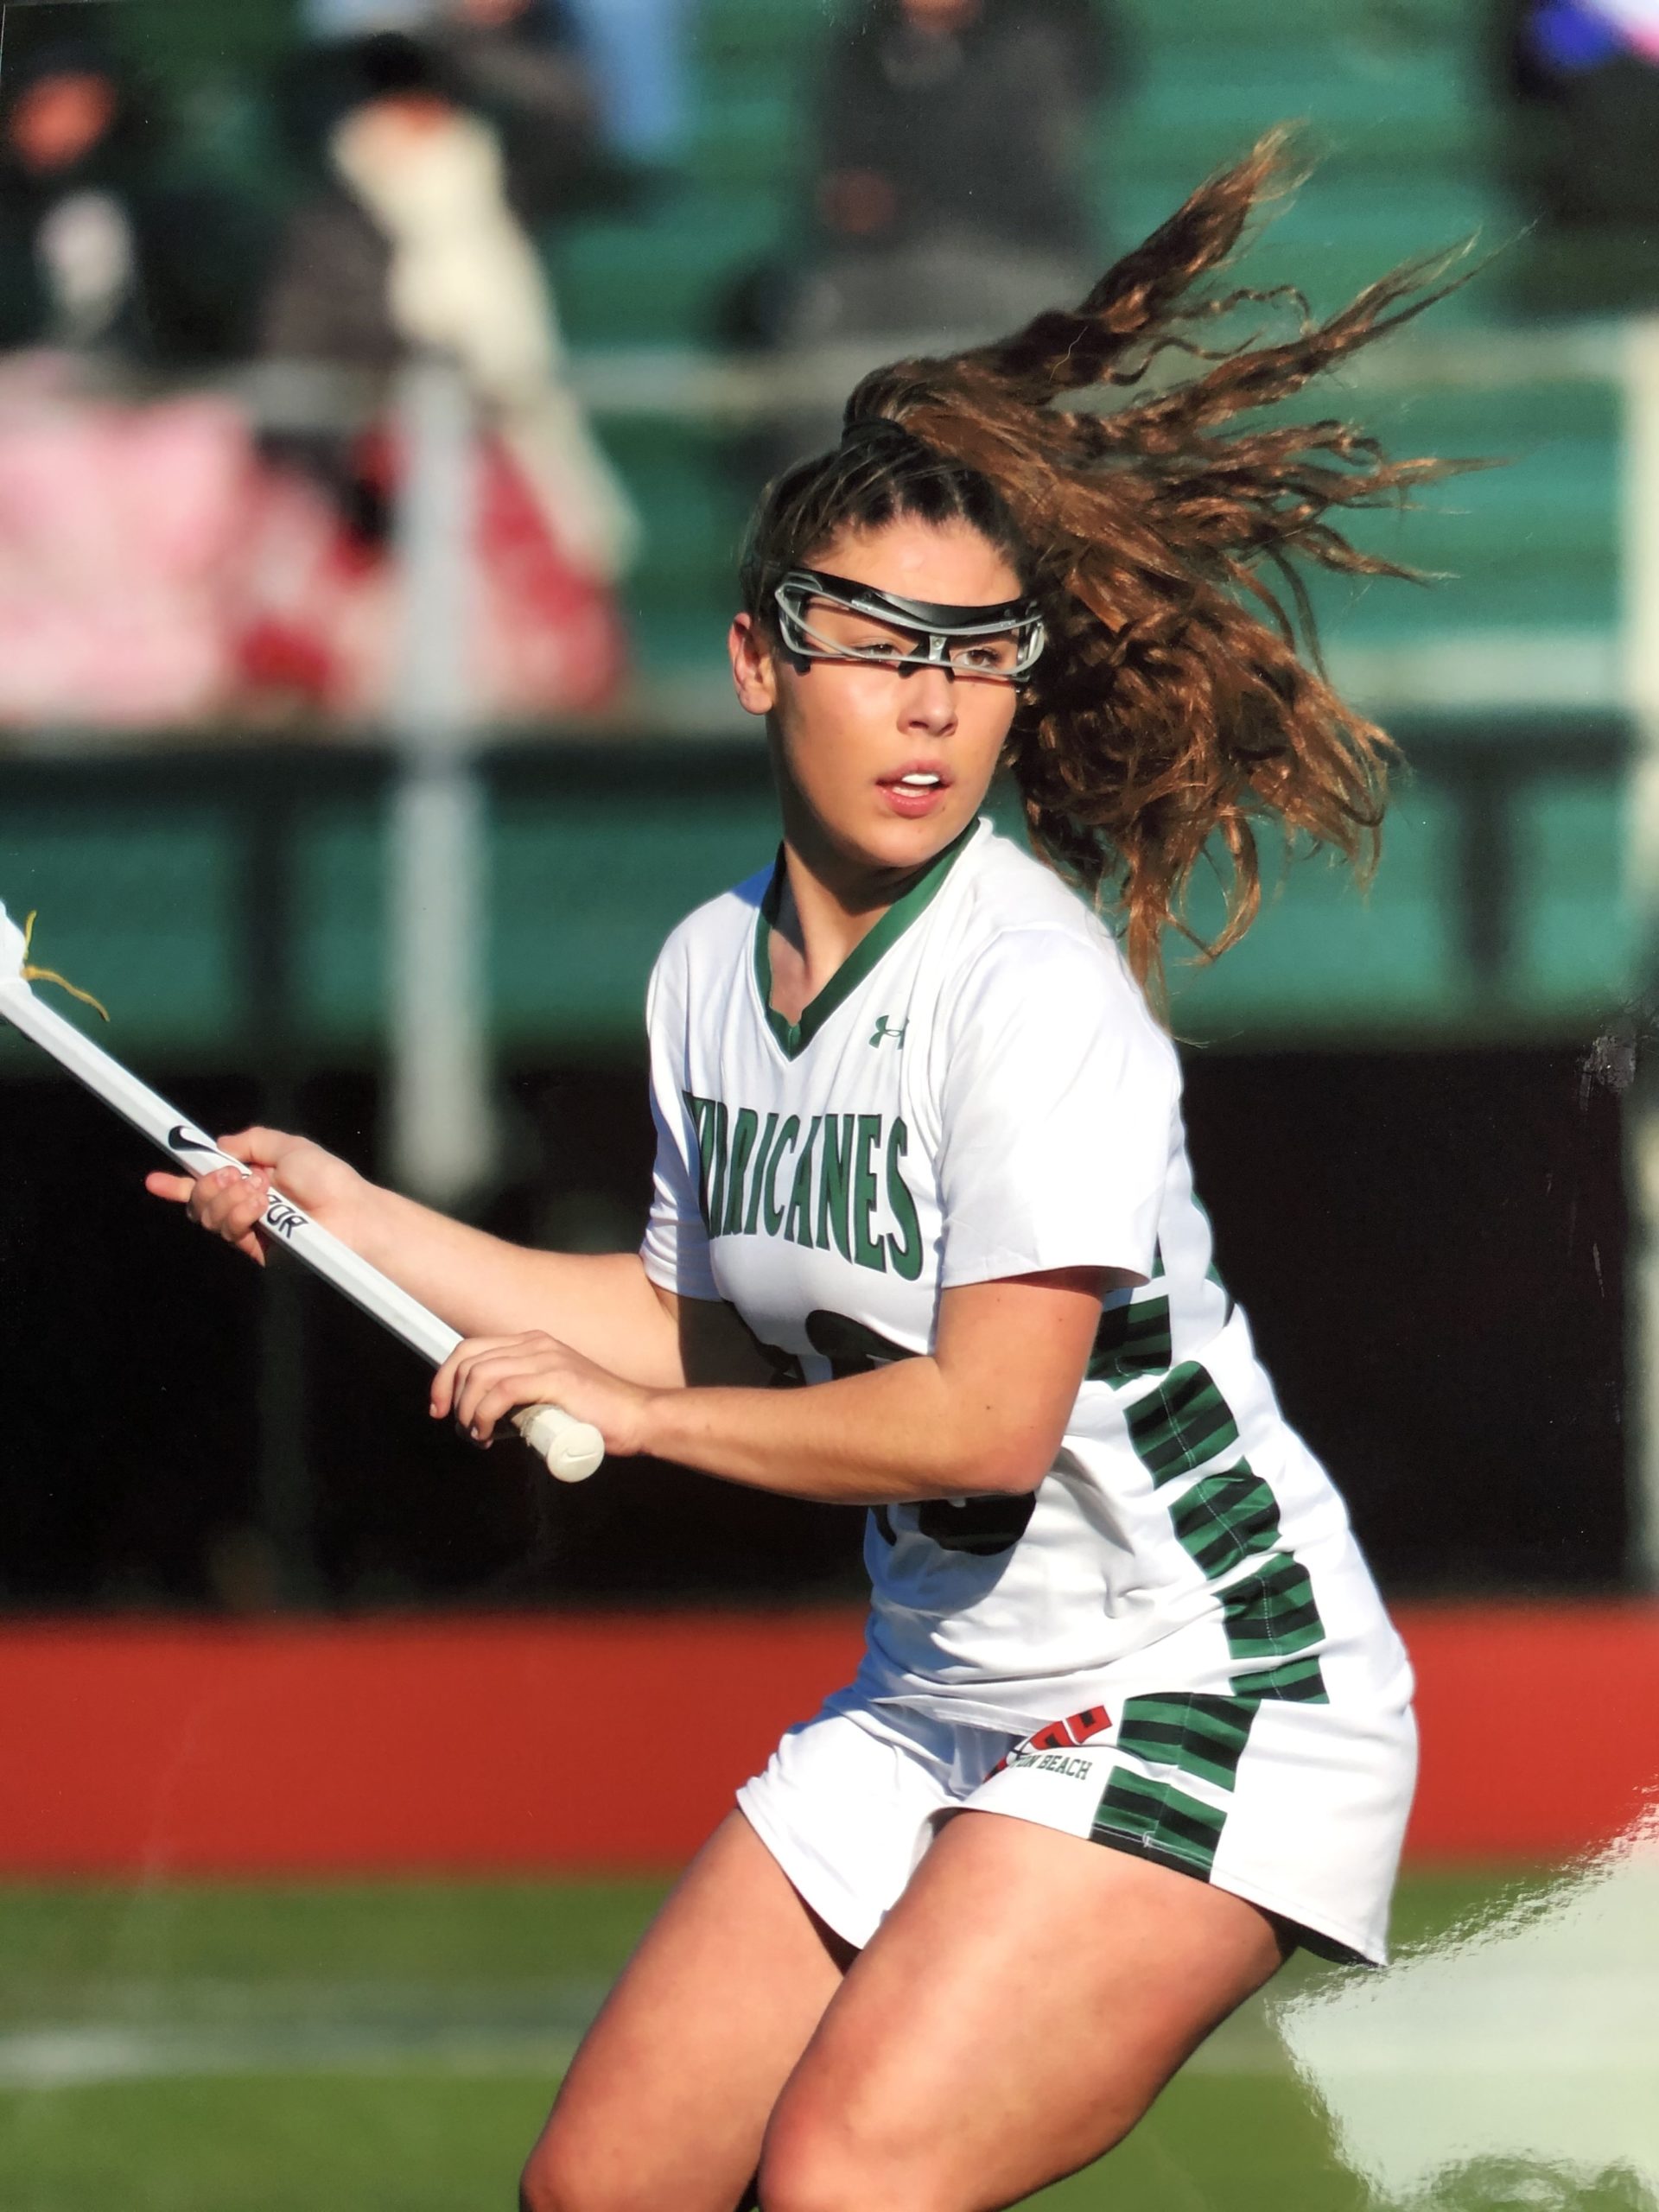 Maureen Duffy in action for Westhampton Beach High School's lacrosse team.